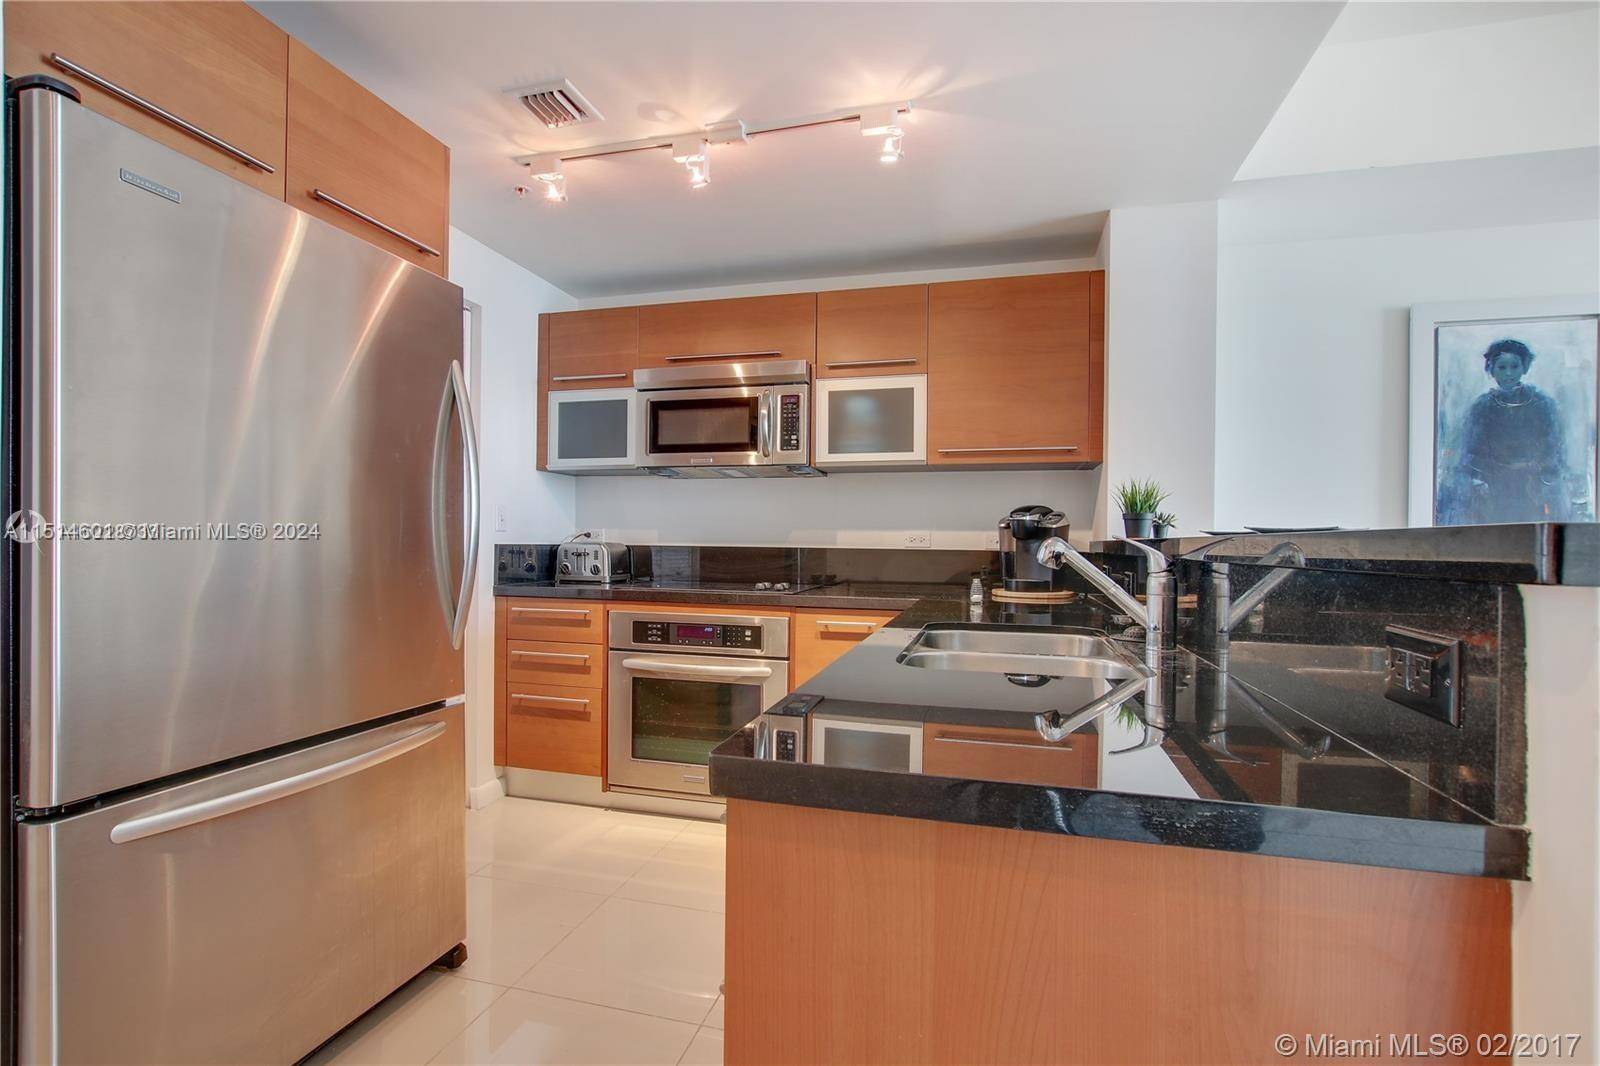 A MUST SEE ! Beautiful unit with 2 bedrooms and 2 full baths, also 2 oversized balconies with an amazing city view.